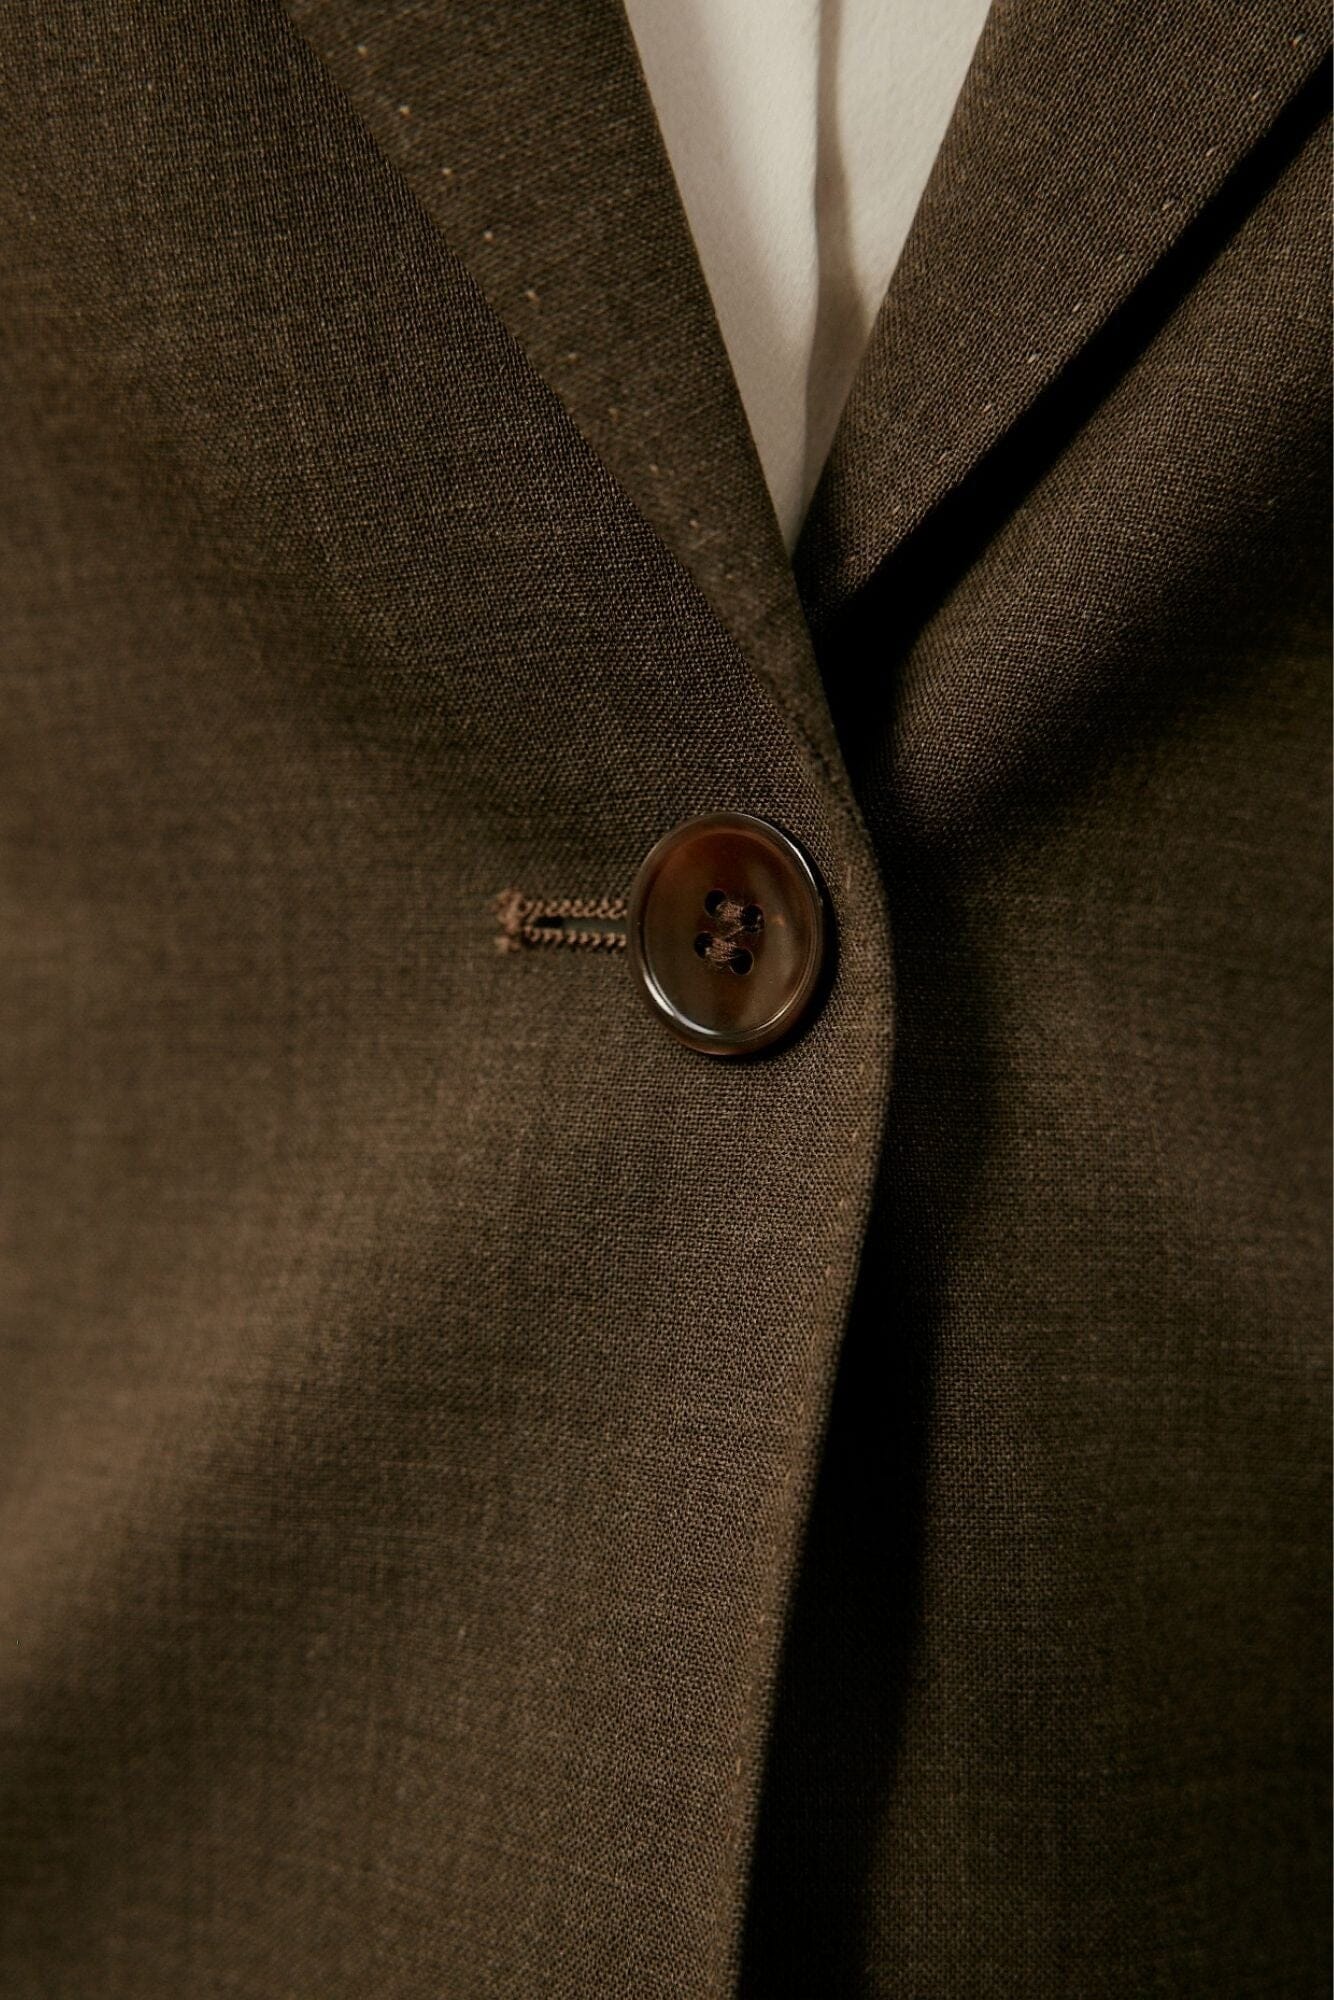 Lily x Ruby Suit - Brown Wool Stretch